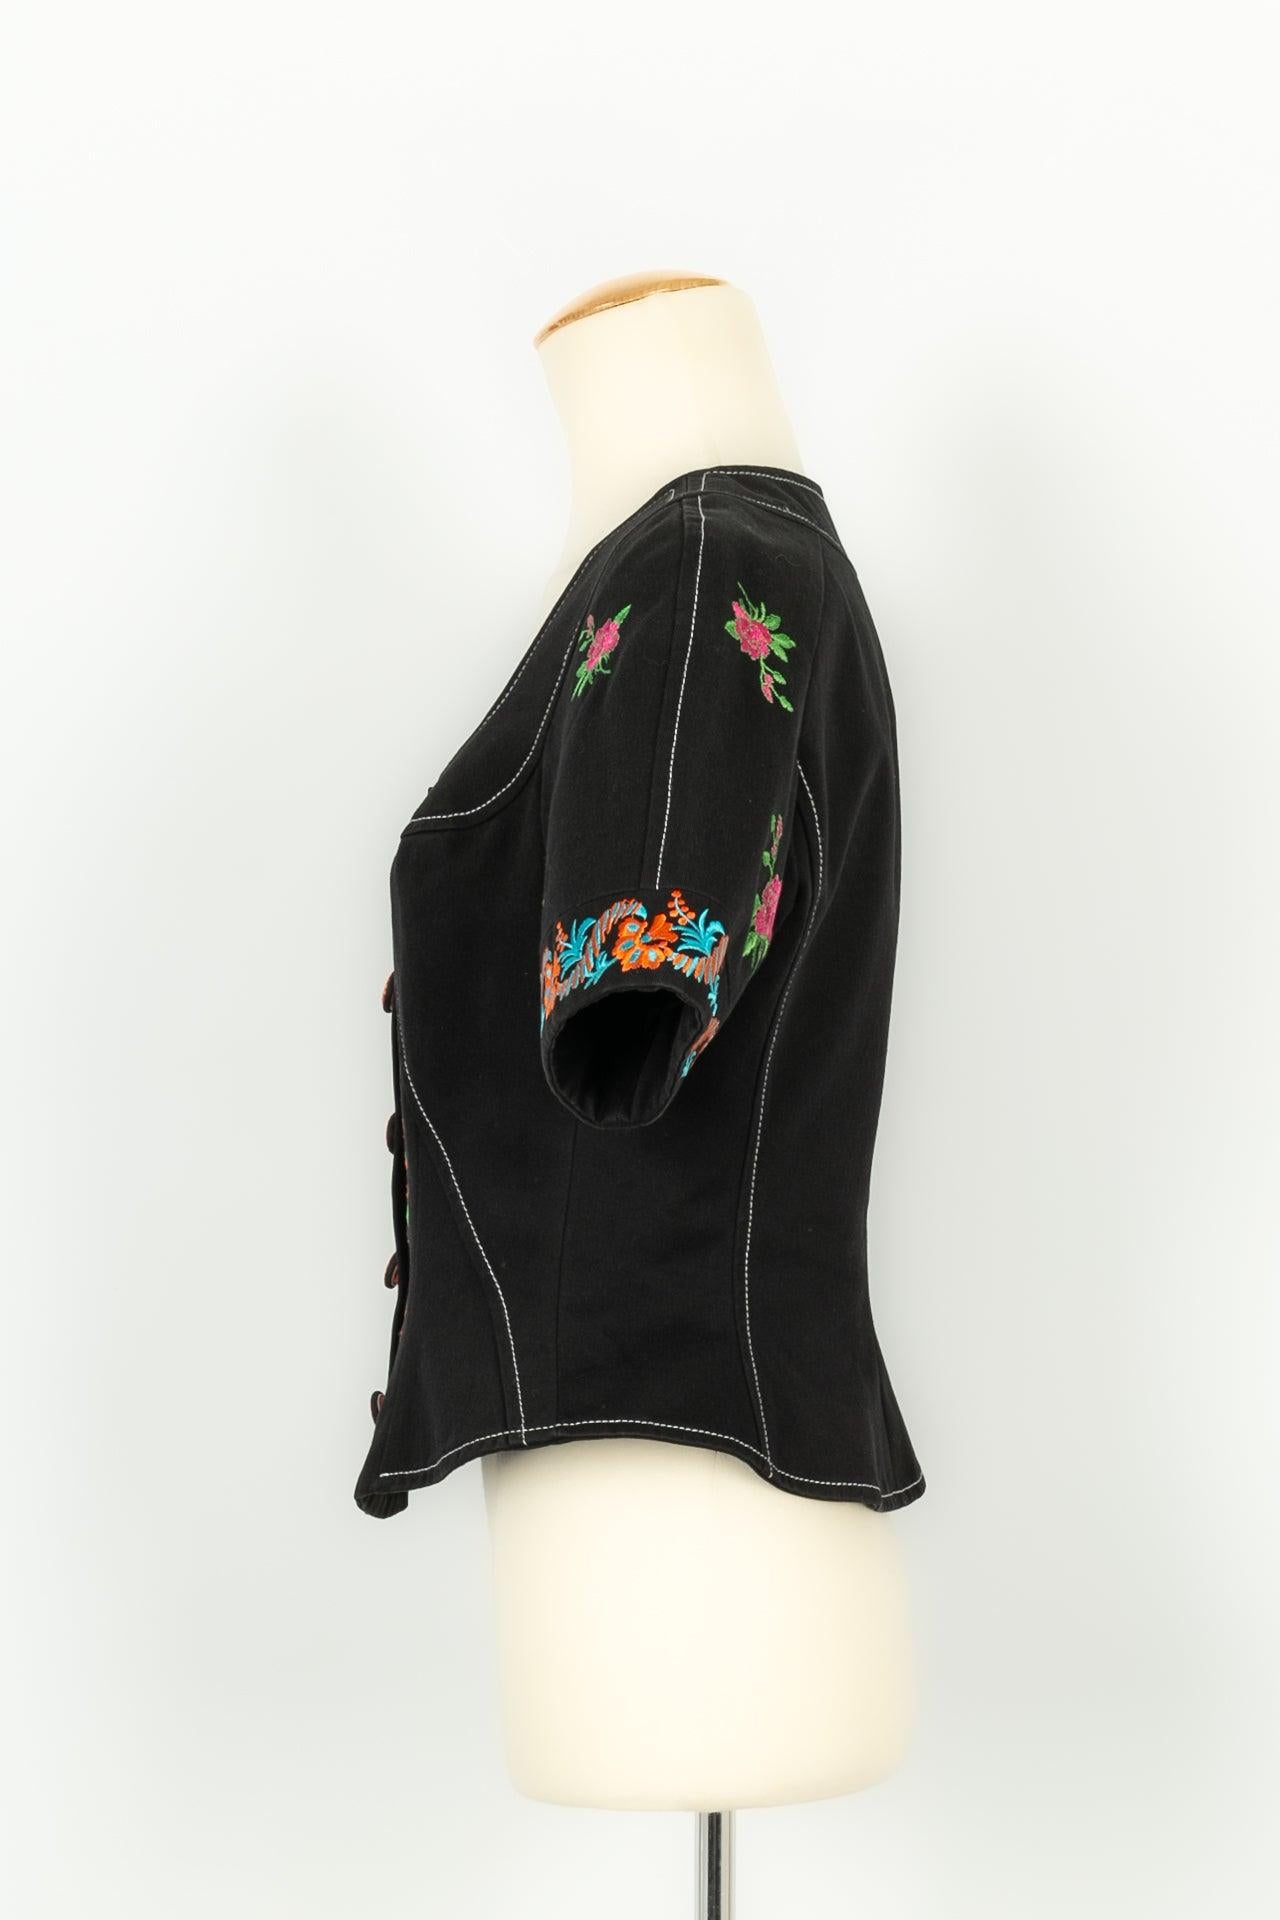 Women's Christian Lacroix Embroidered Top in Black Cotton, 1993 For Sale